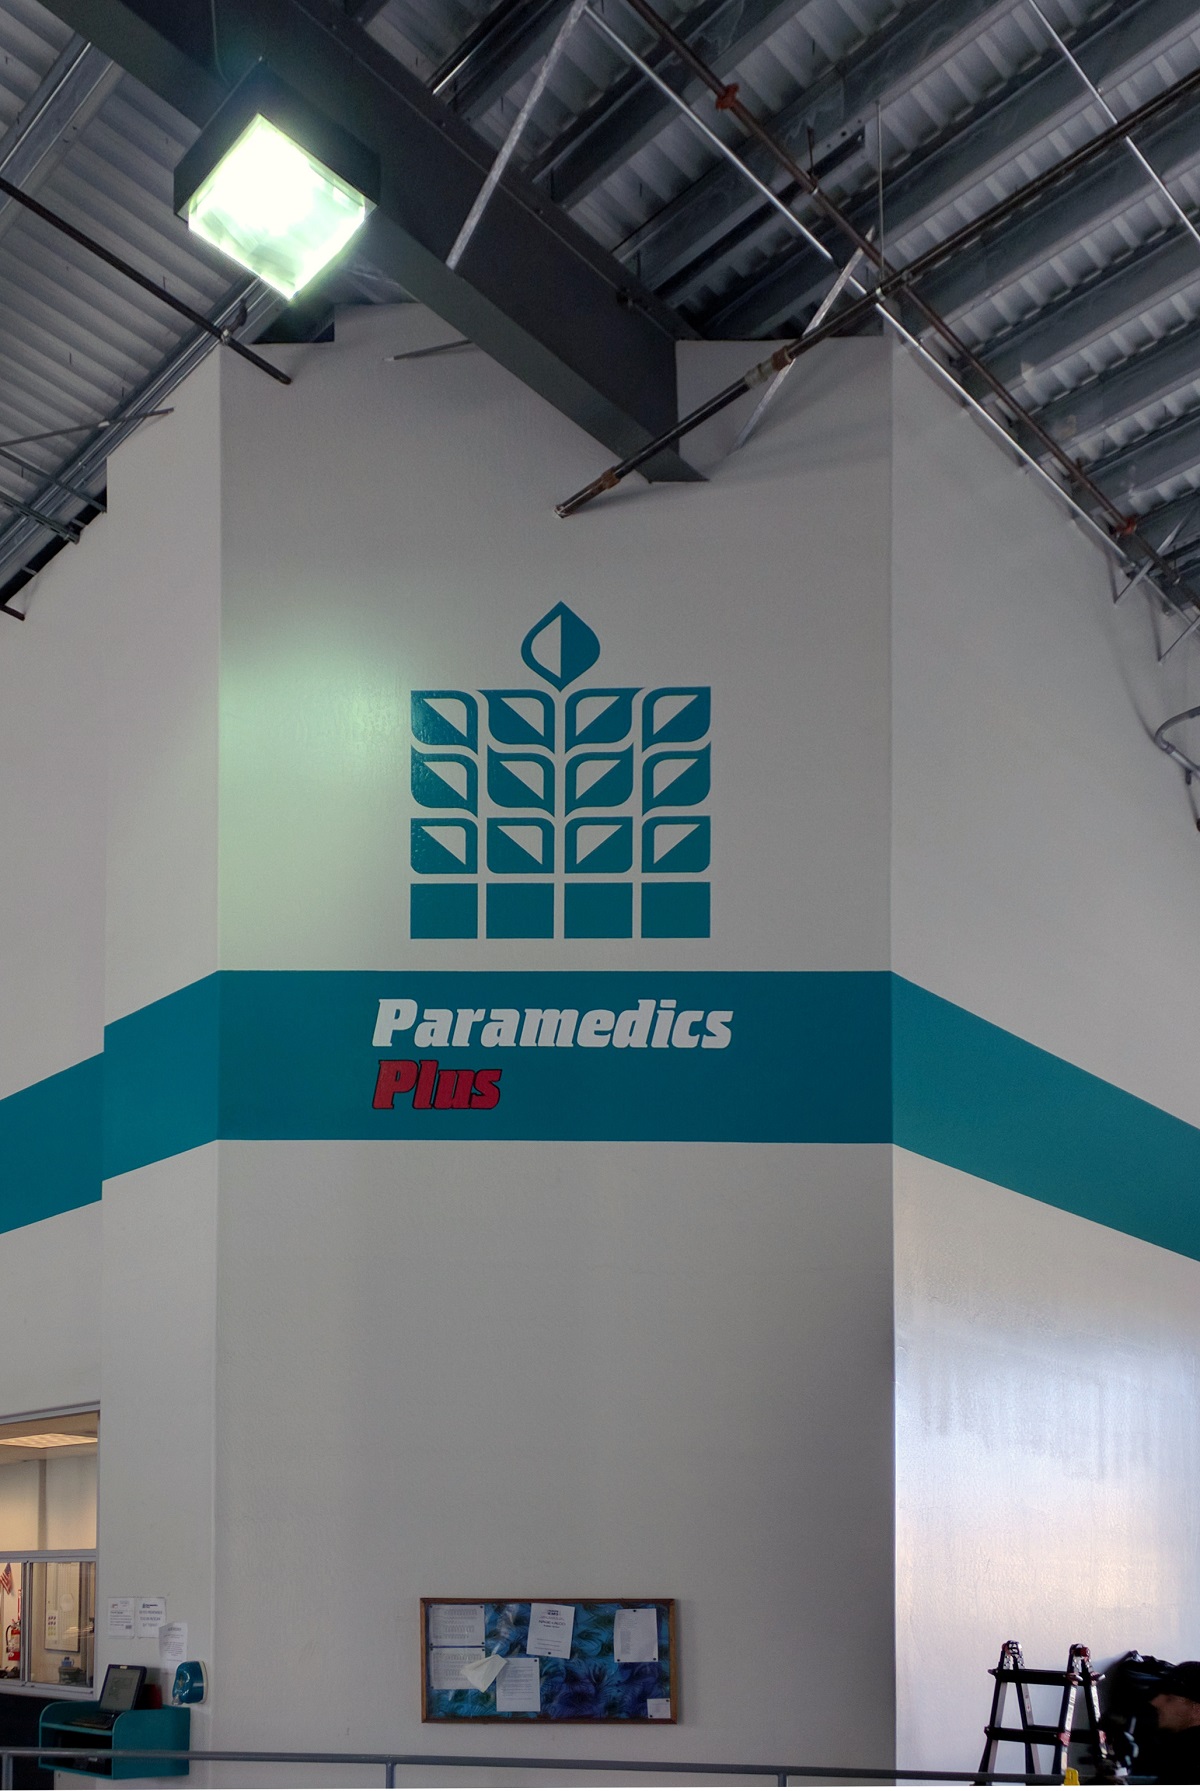 A large wall mural for a paramedics agency designed by Speed Pro Imaging.